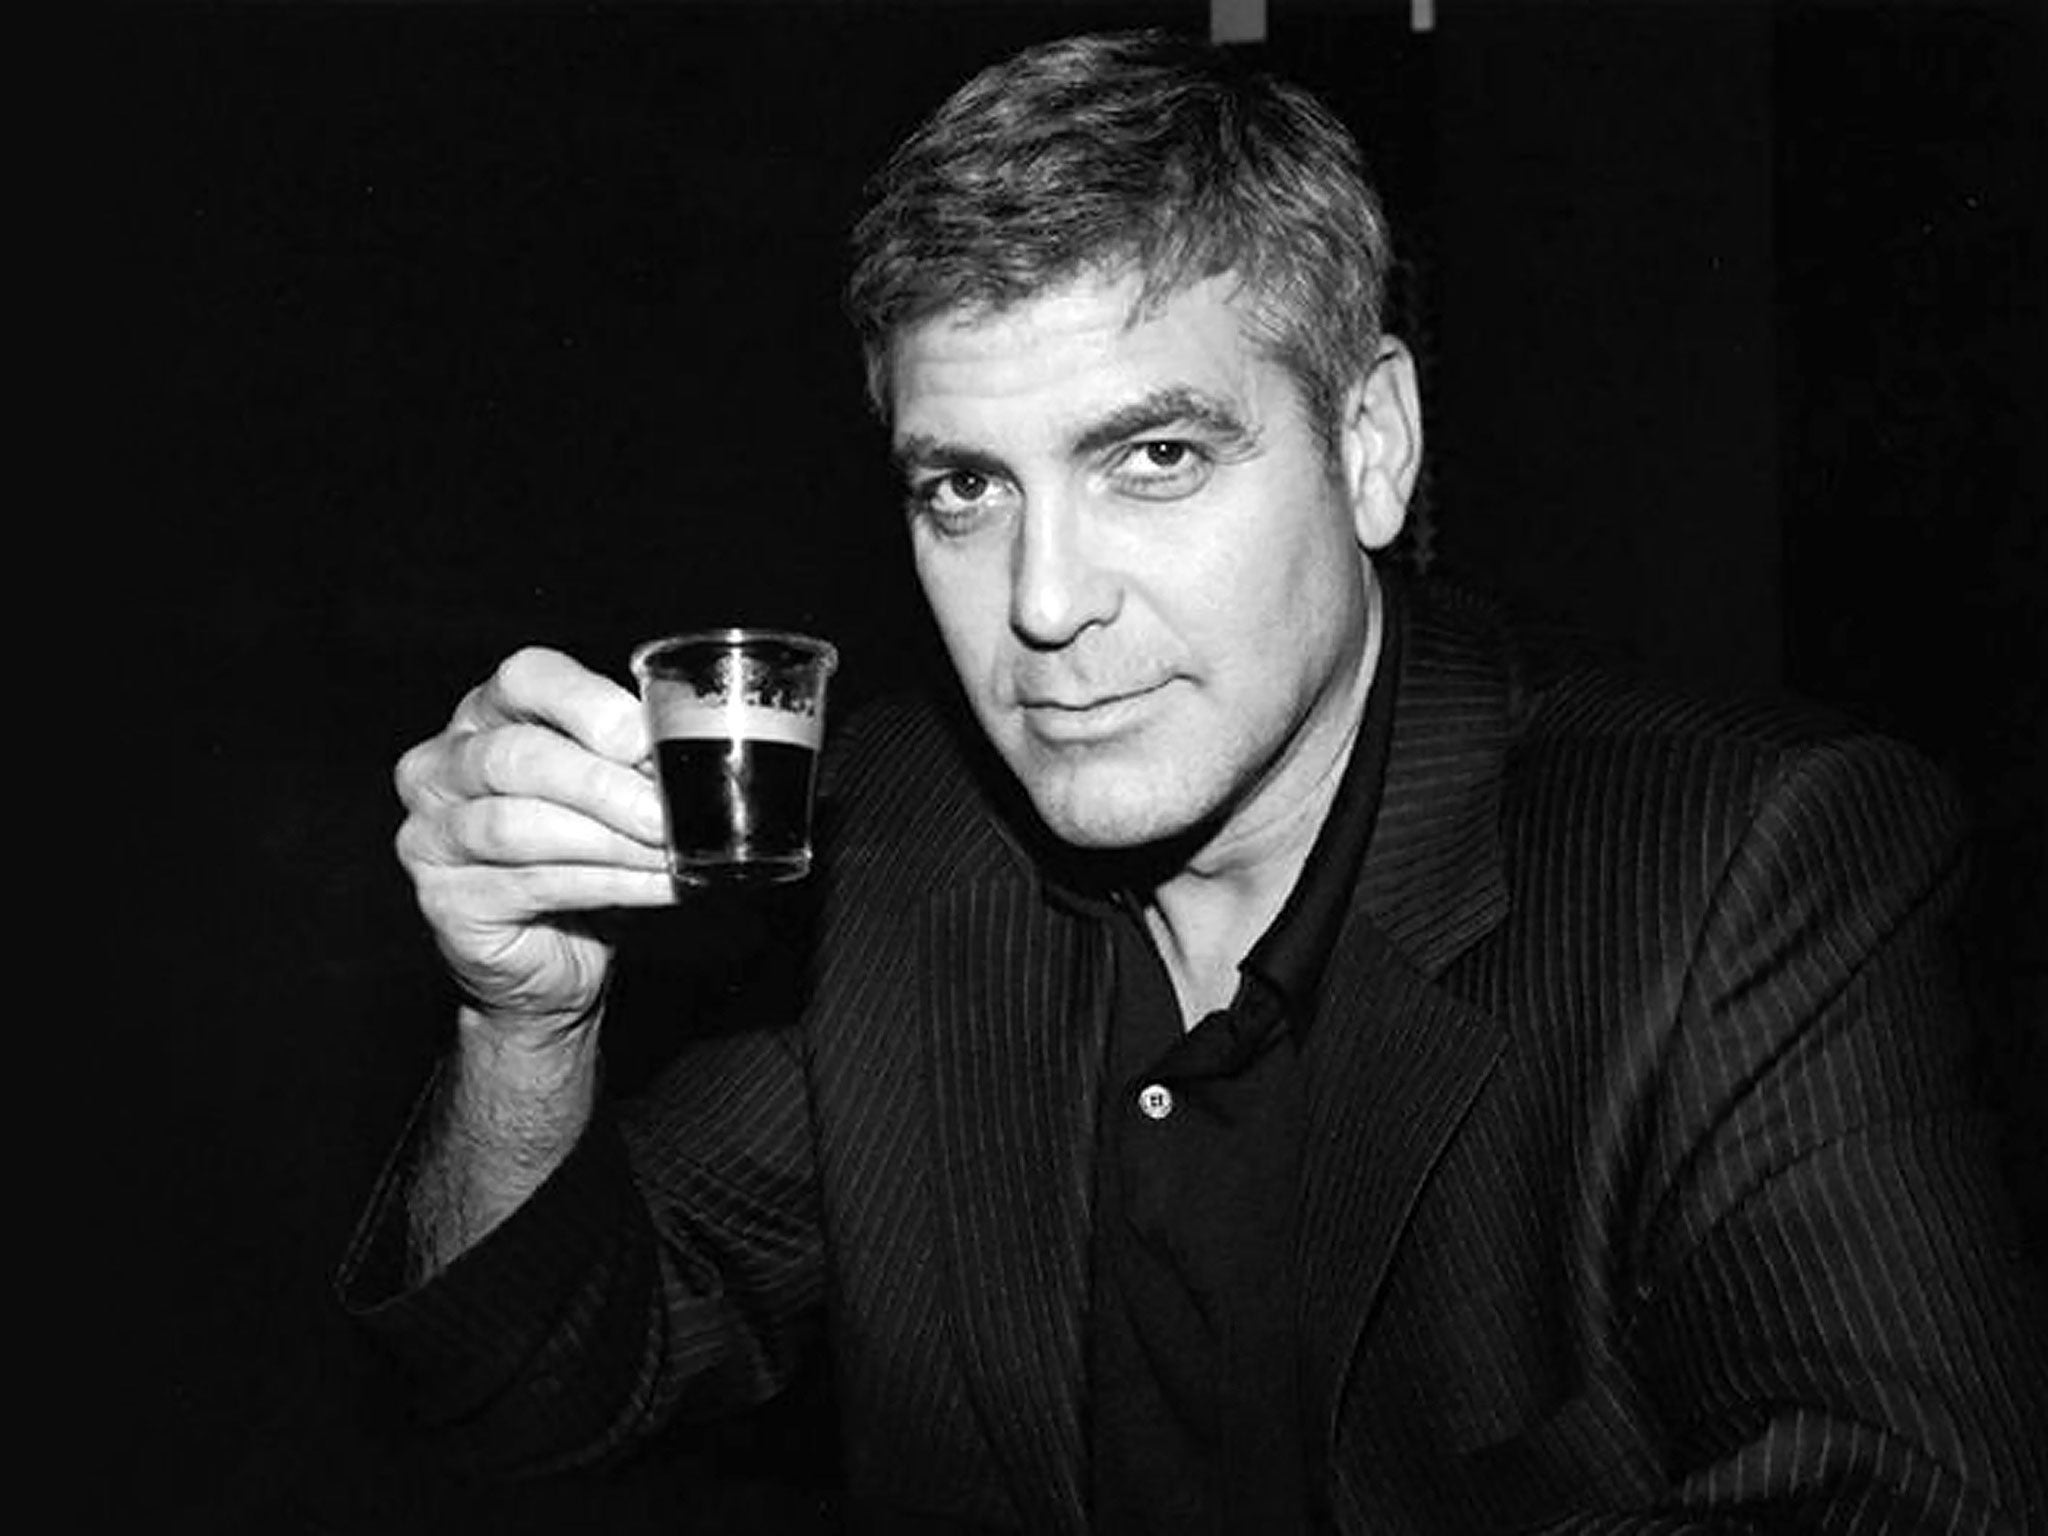 Pod cast: George Clooney has been appearing in adverts for Nespresso coffeemakers